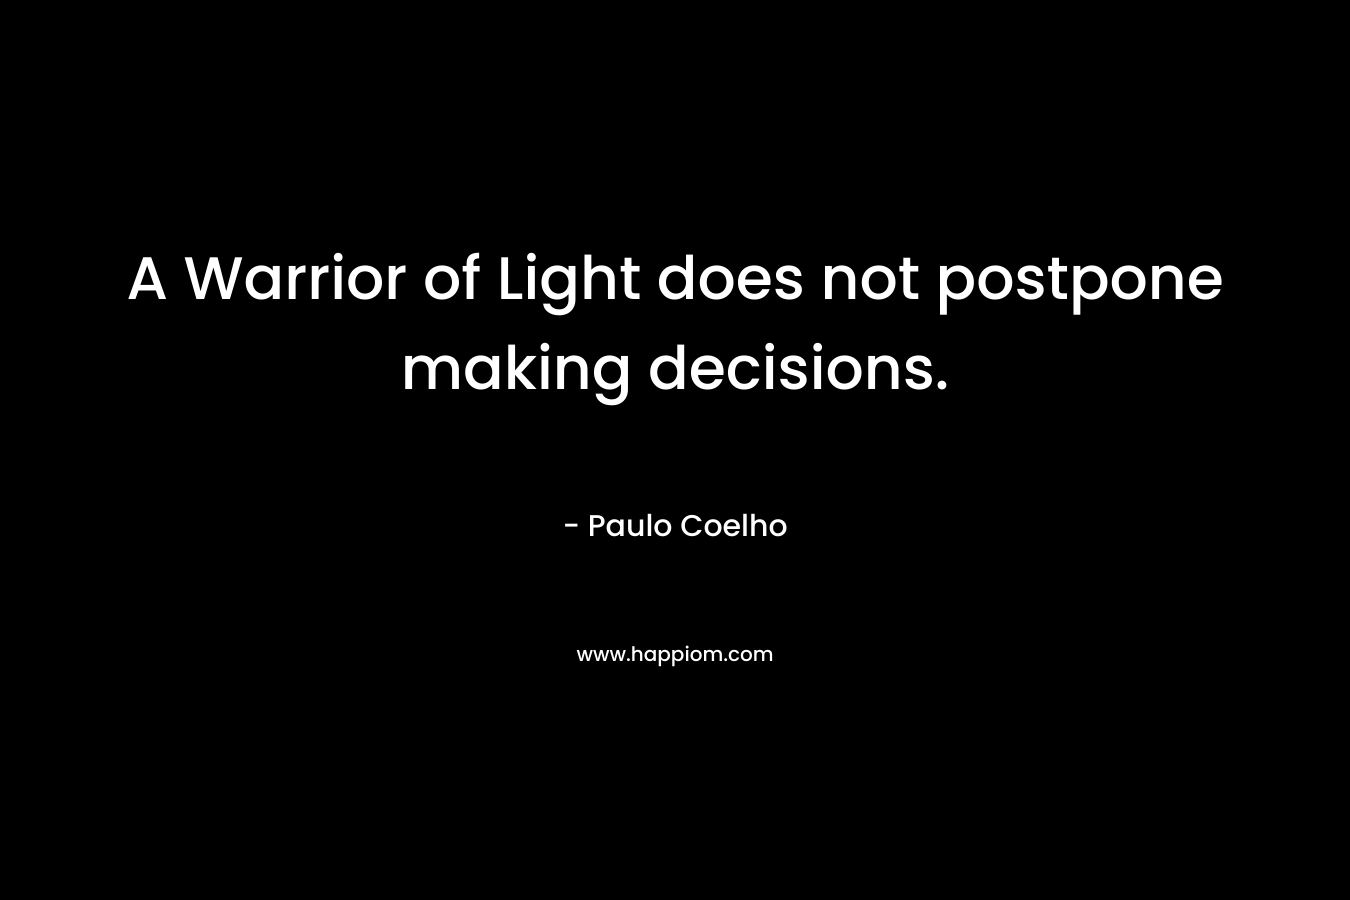 A Warrior of Light does not postpone making decisions.